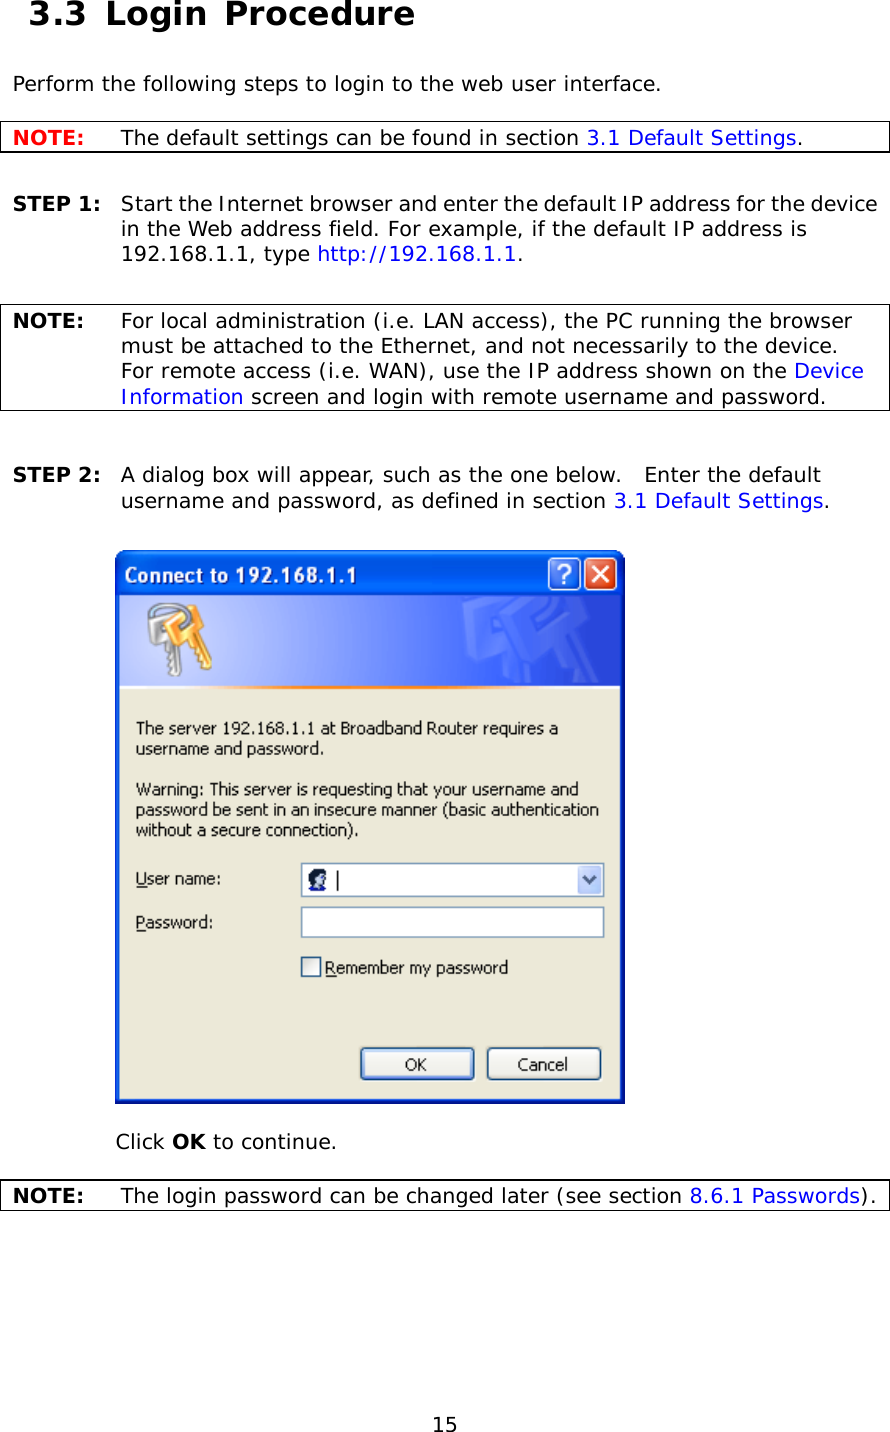  15  3.3 Login Procedure Perform the following steps to login to the web user interface.    NOTE: The default settings can be found in section 3.1 Default Settings.     STEP 1:  Start the Internet browser and enter the default IP address for the device in the Web address field. For example, if the default IP address is 192.168.1.1, type http://192.168.1.1.  NOTE: For local administration (i.e. LAN access), the PC running the browser must be attached to the Ethernet, and not necessarily to the device.   For remote access (i.e. WAN), use the IP address shown on the Device Information screen and login with remote username and password.  STEP 2:  A dialog box will appear, such as the one below.  Enter the default username and password, as defined in section 3.1 Default Settings.      Click OK to continue.  NOTE:   The login password can be changed later (see section 8.6.1 Passwords). 